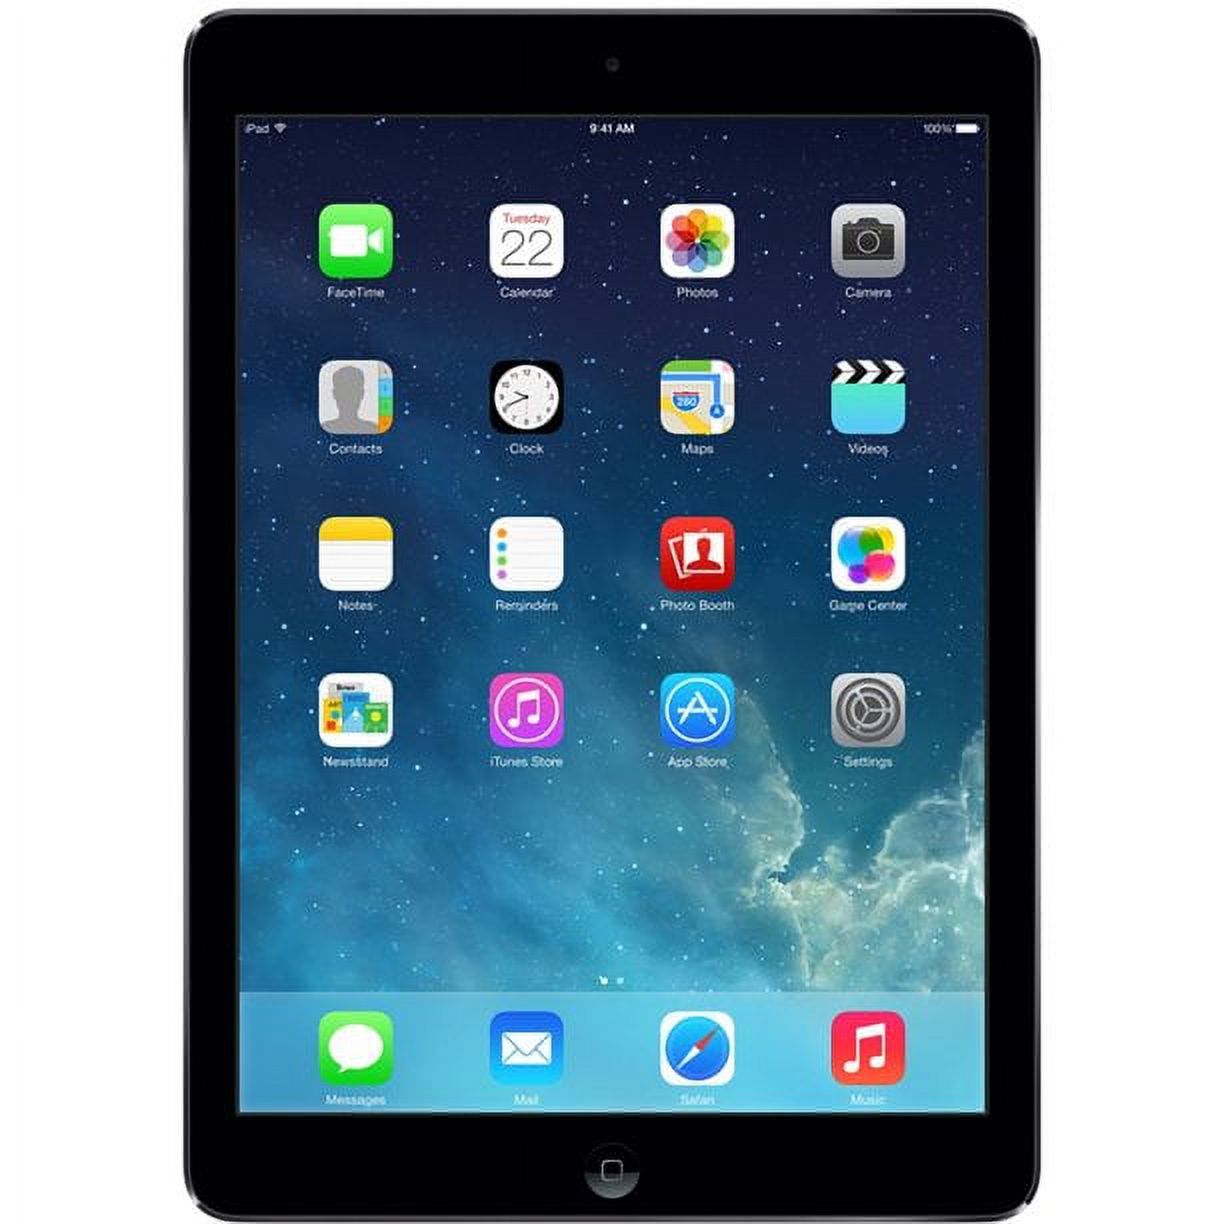 Apple iPad Air ME993LL/A Tablet, 9.7" QXGA, Apple A7, 16 GB Storage, iOS 7, Space Gray - image 1 of 5